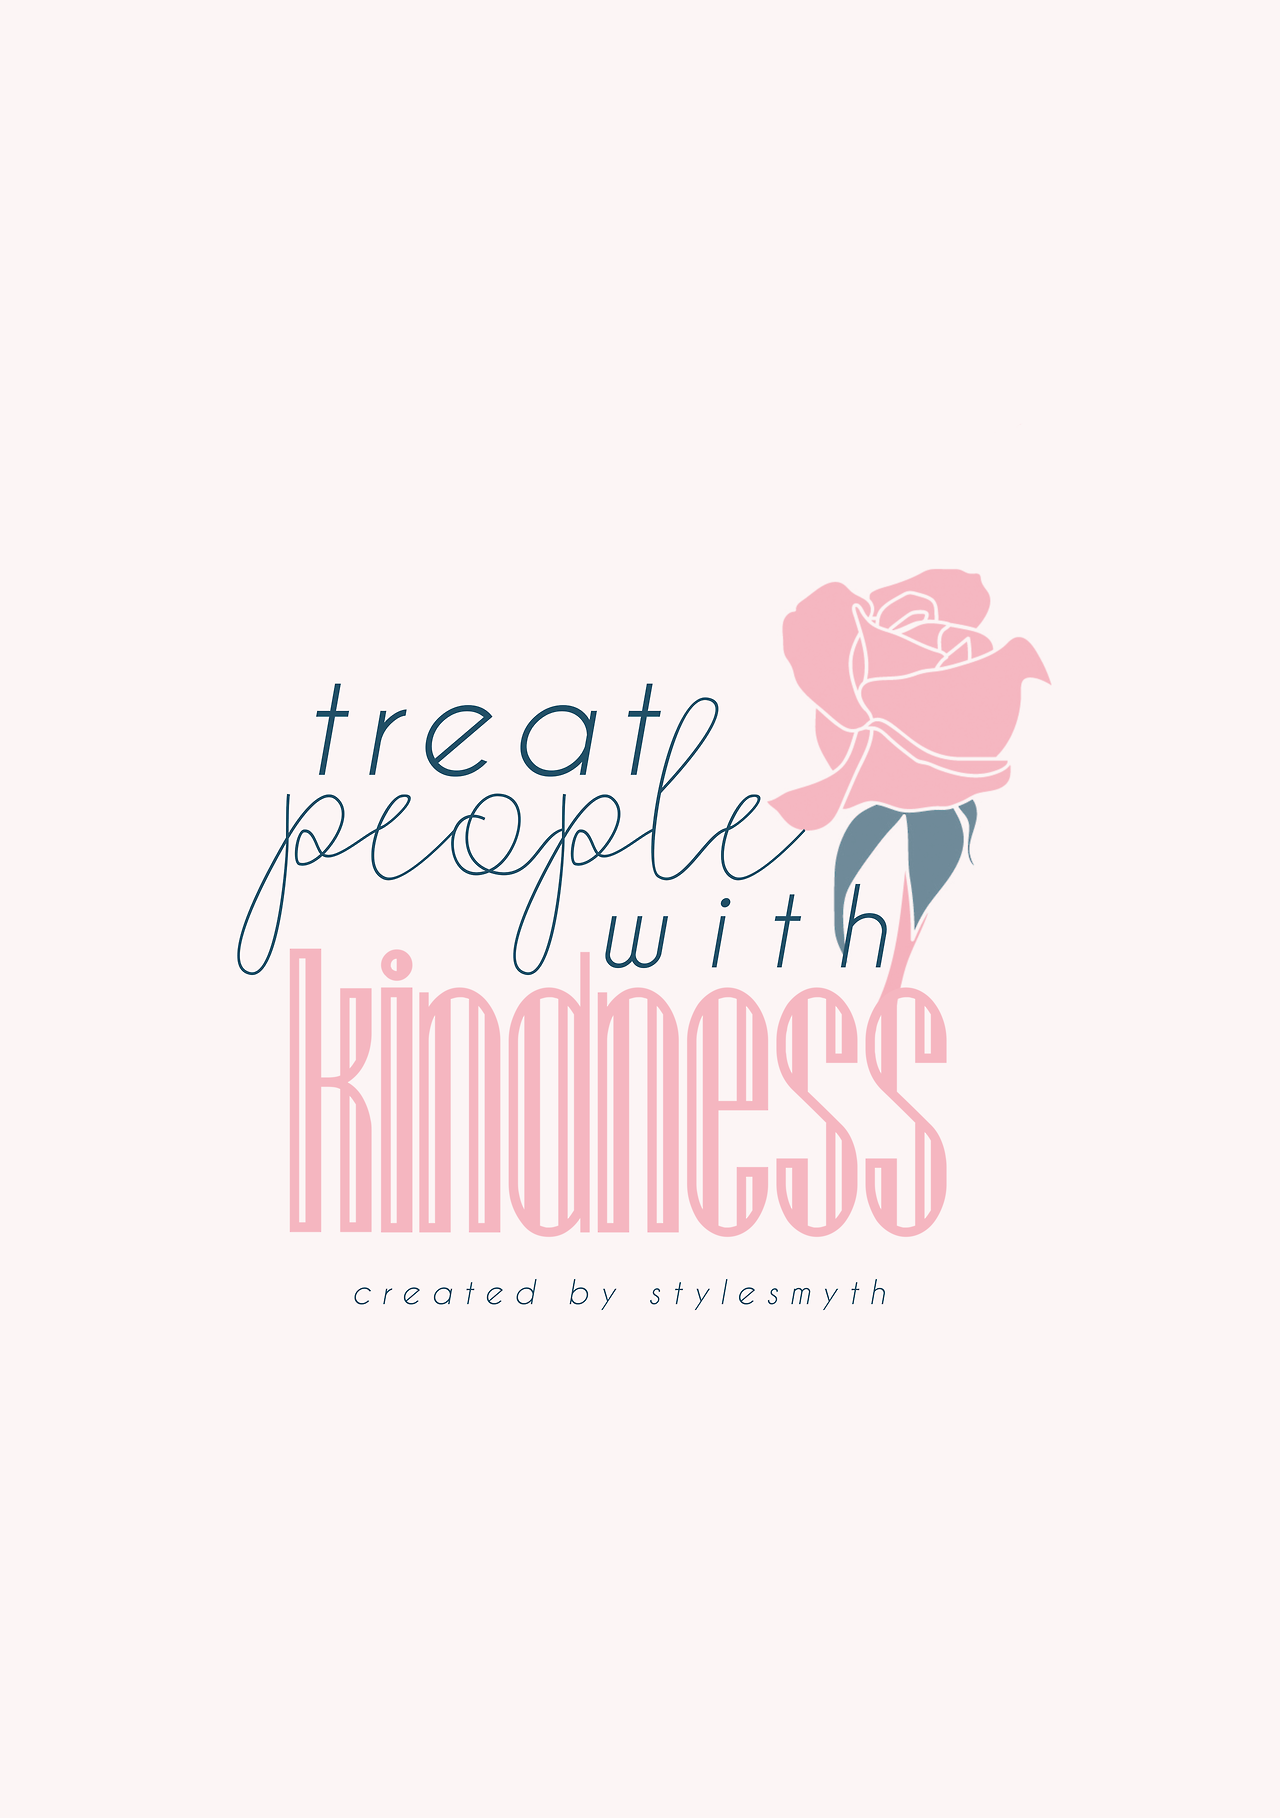 Treat People With Kindness Styles design available